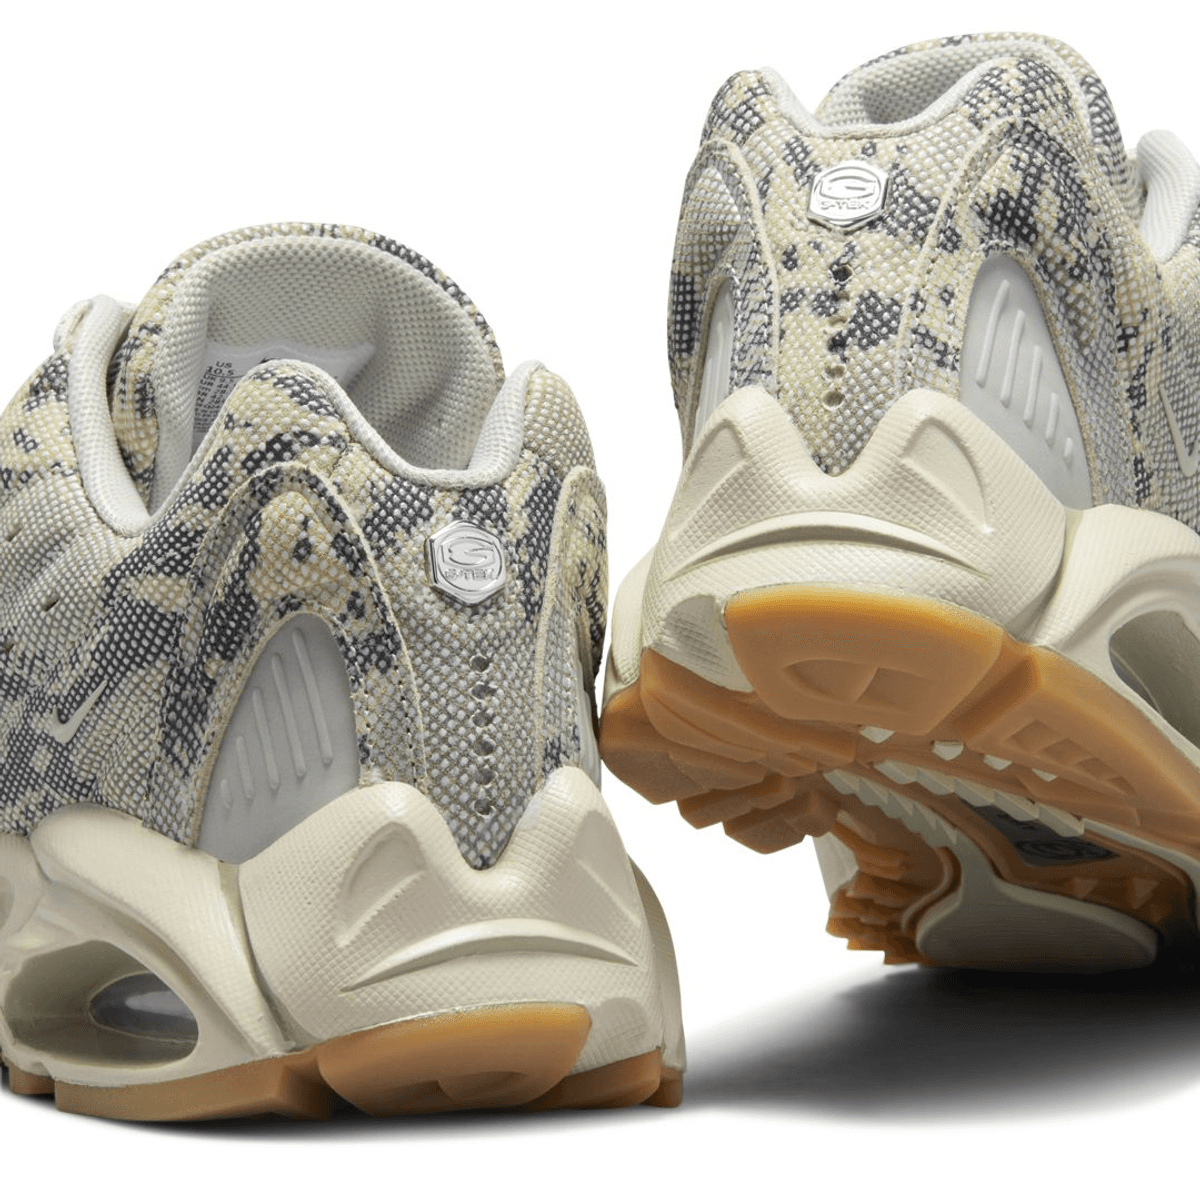 Drake Is Putting His Touch On The Nike Hot Step Air Terra With Snakeskin